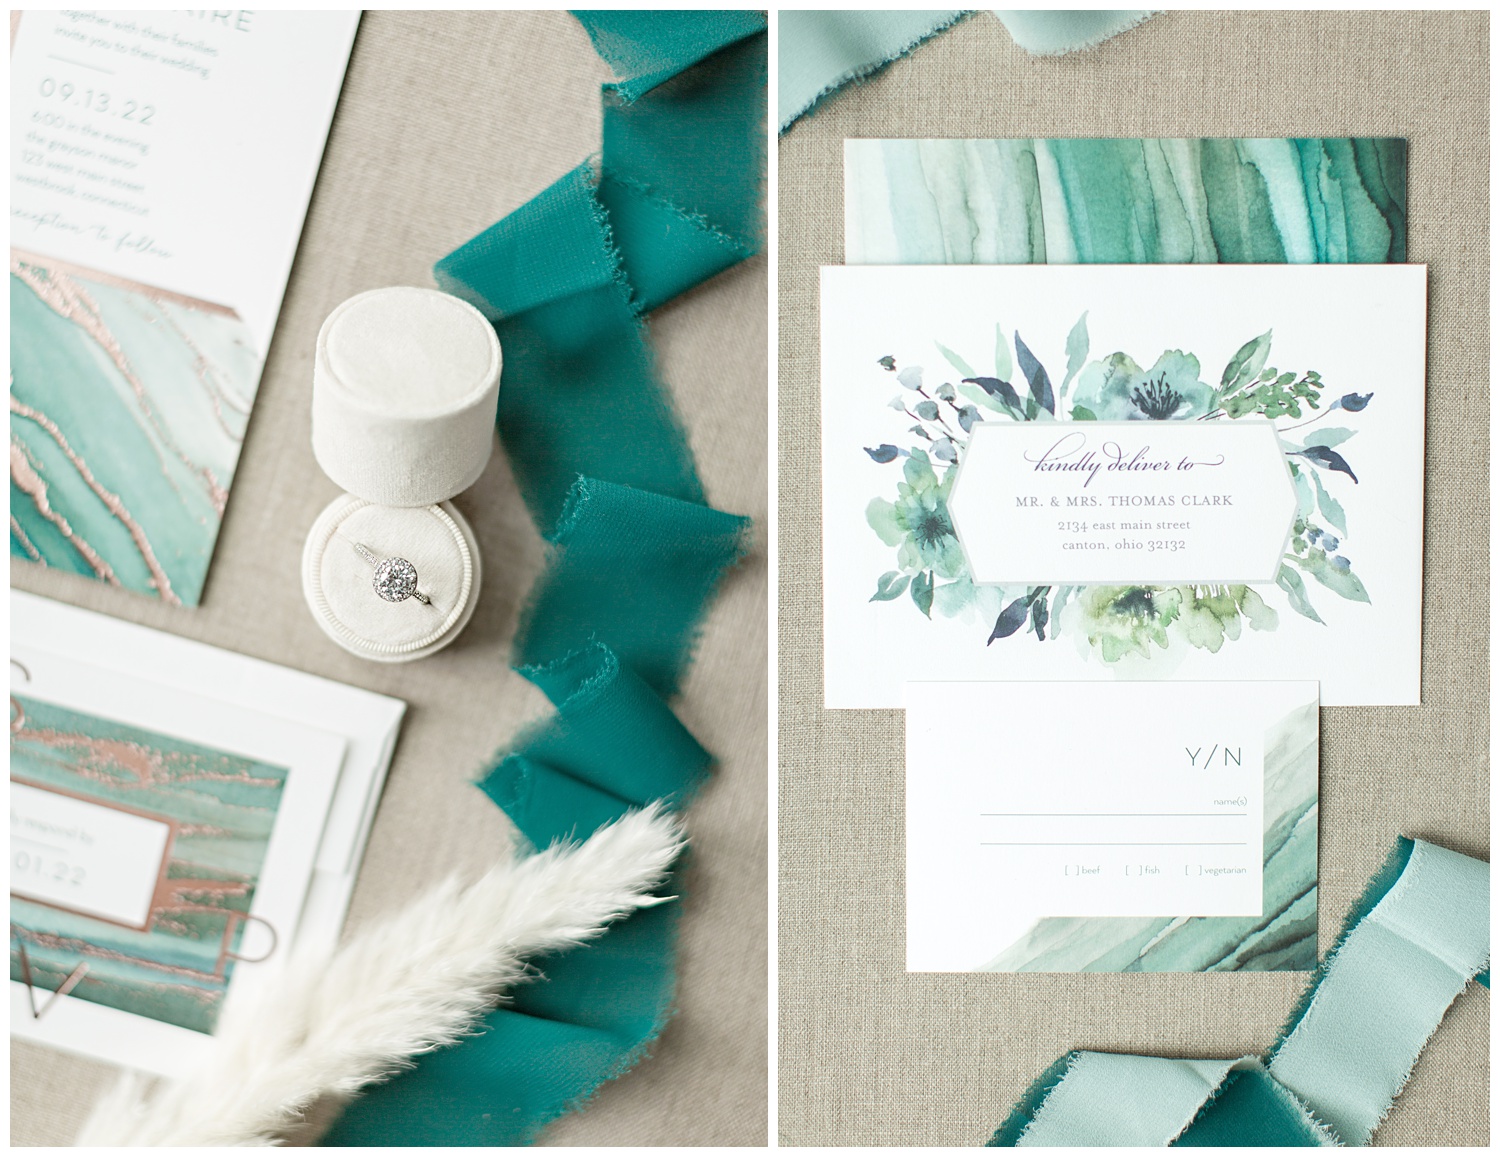 Teal watercolor and copper foil stamped wedding invitation suite from Shutterfly beautifully styled with pampas grass, cream ring box and teal frayed edge ribbon.